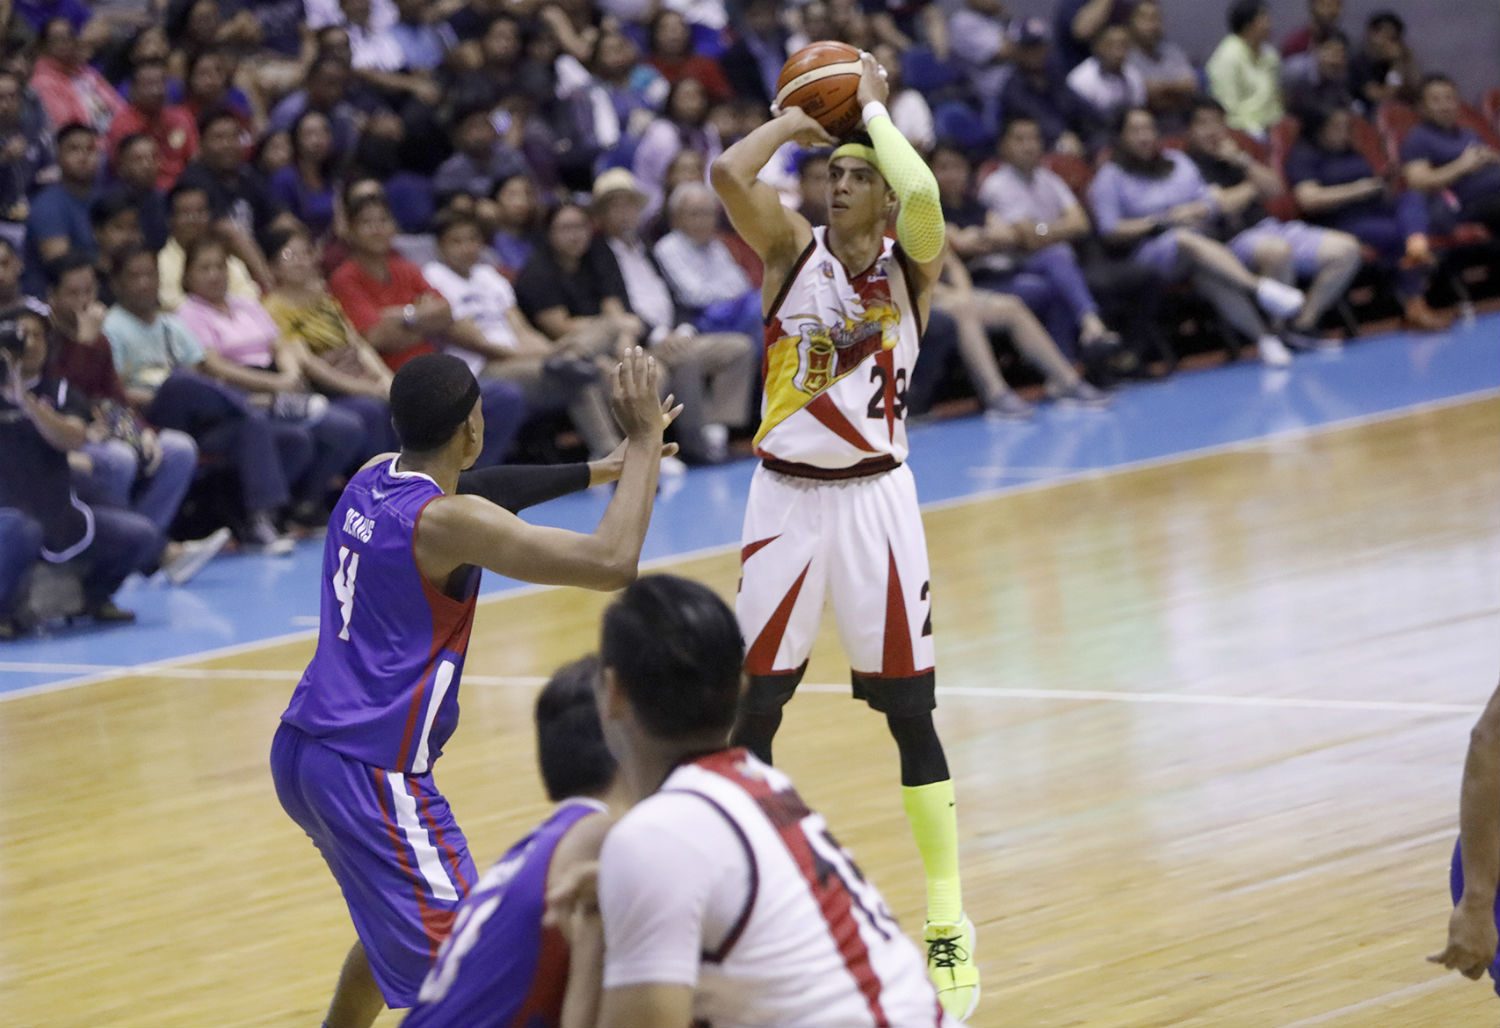 San Miguel’s Arwind Santos itching to end PH Cup finals in Game 5